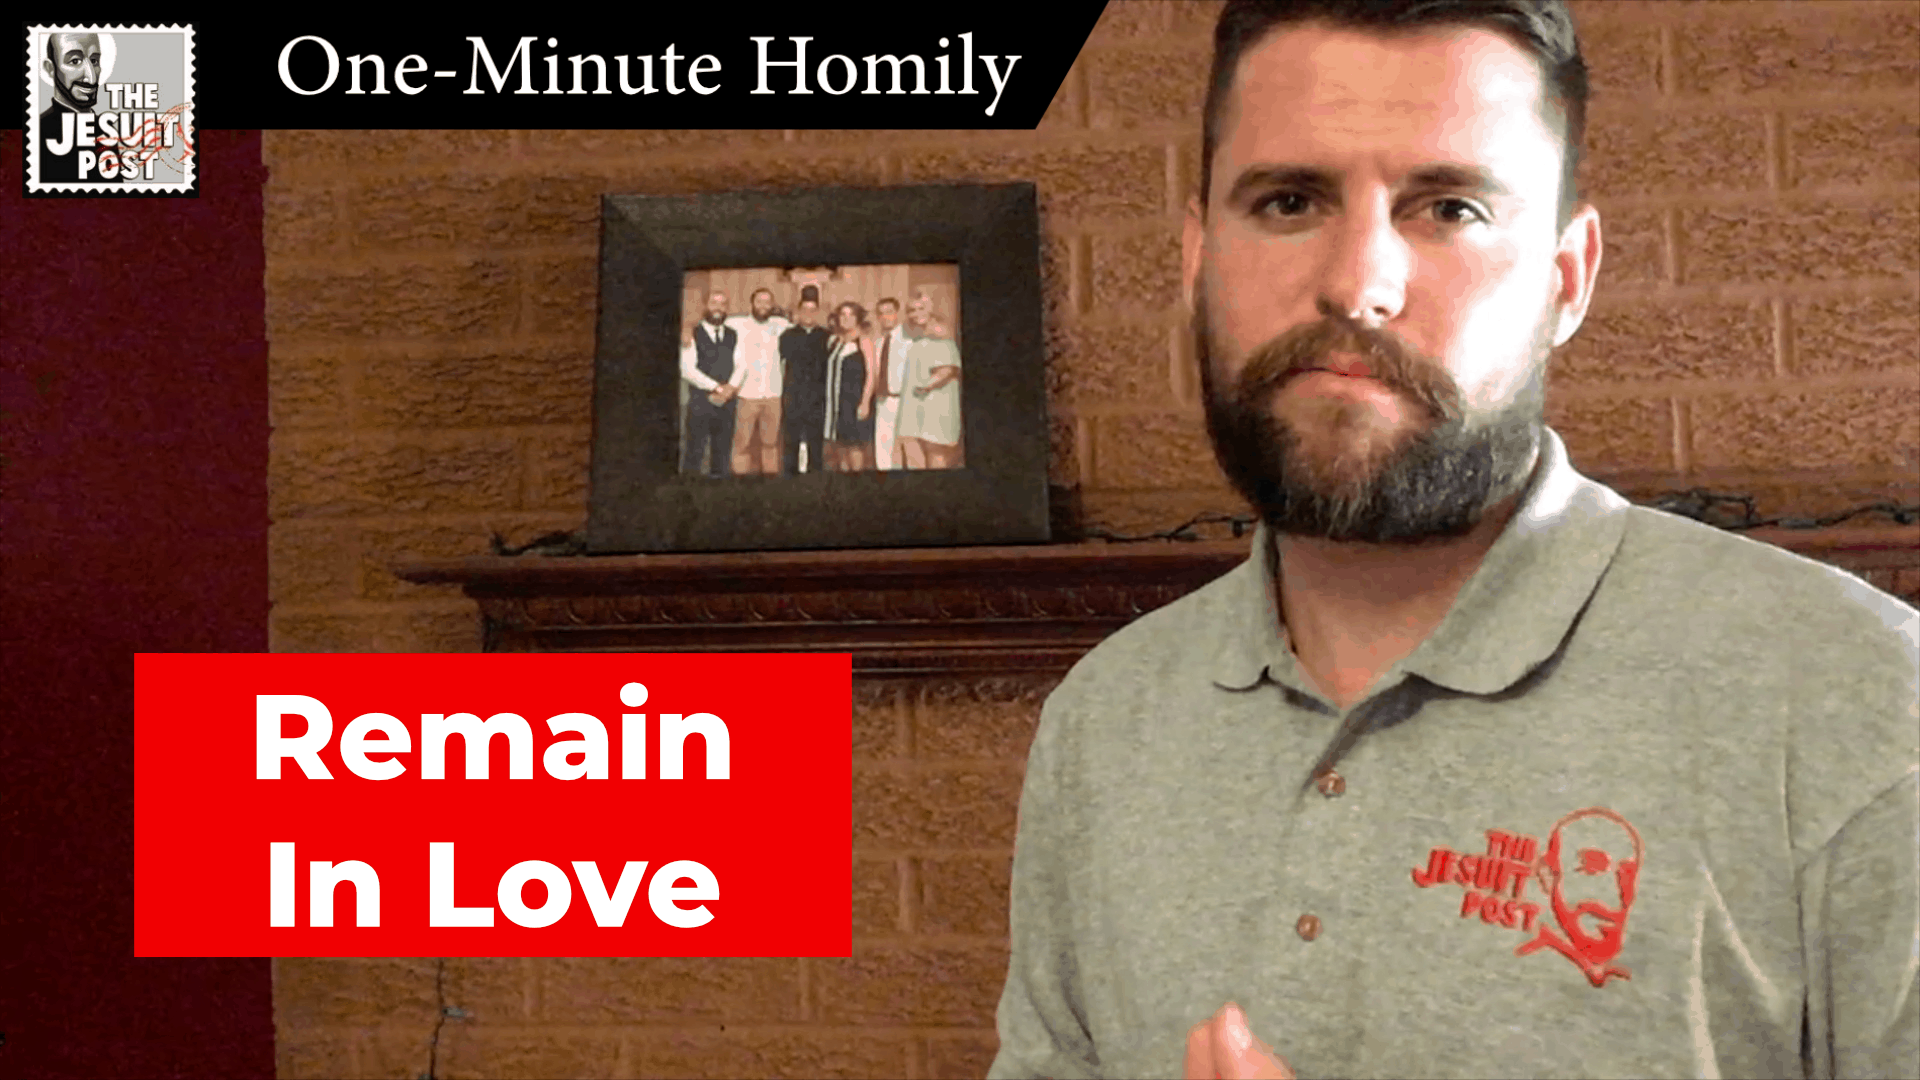 One-Minute Homily: “Remain in Love”